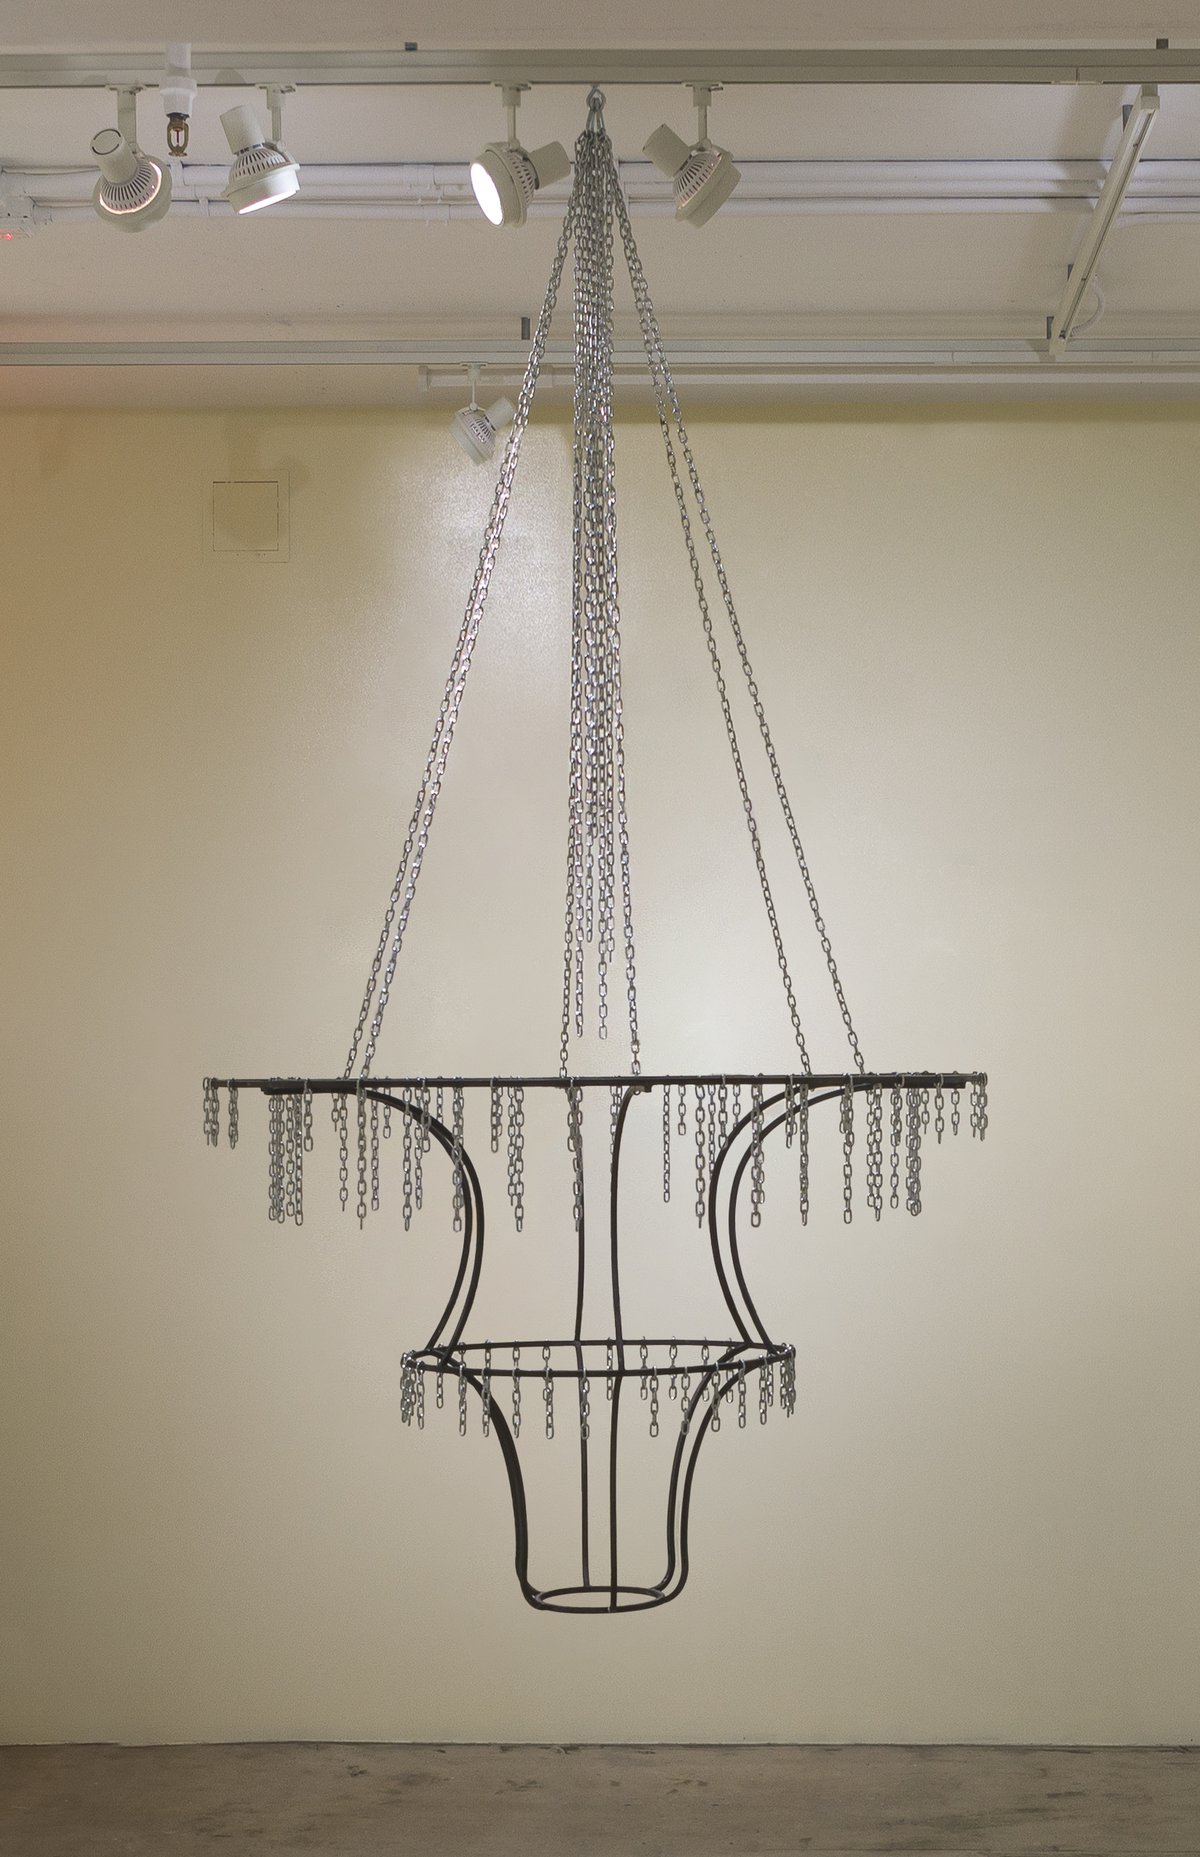 Benjamin HirteGhost, 2019Steel, bluing stain, chrome plated chains⌀ 125 x 250 cmLife and Limbs, Swiss Institute, New York, 2020